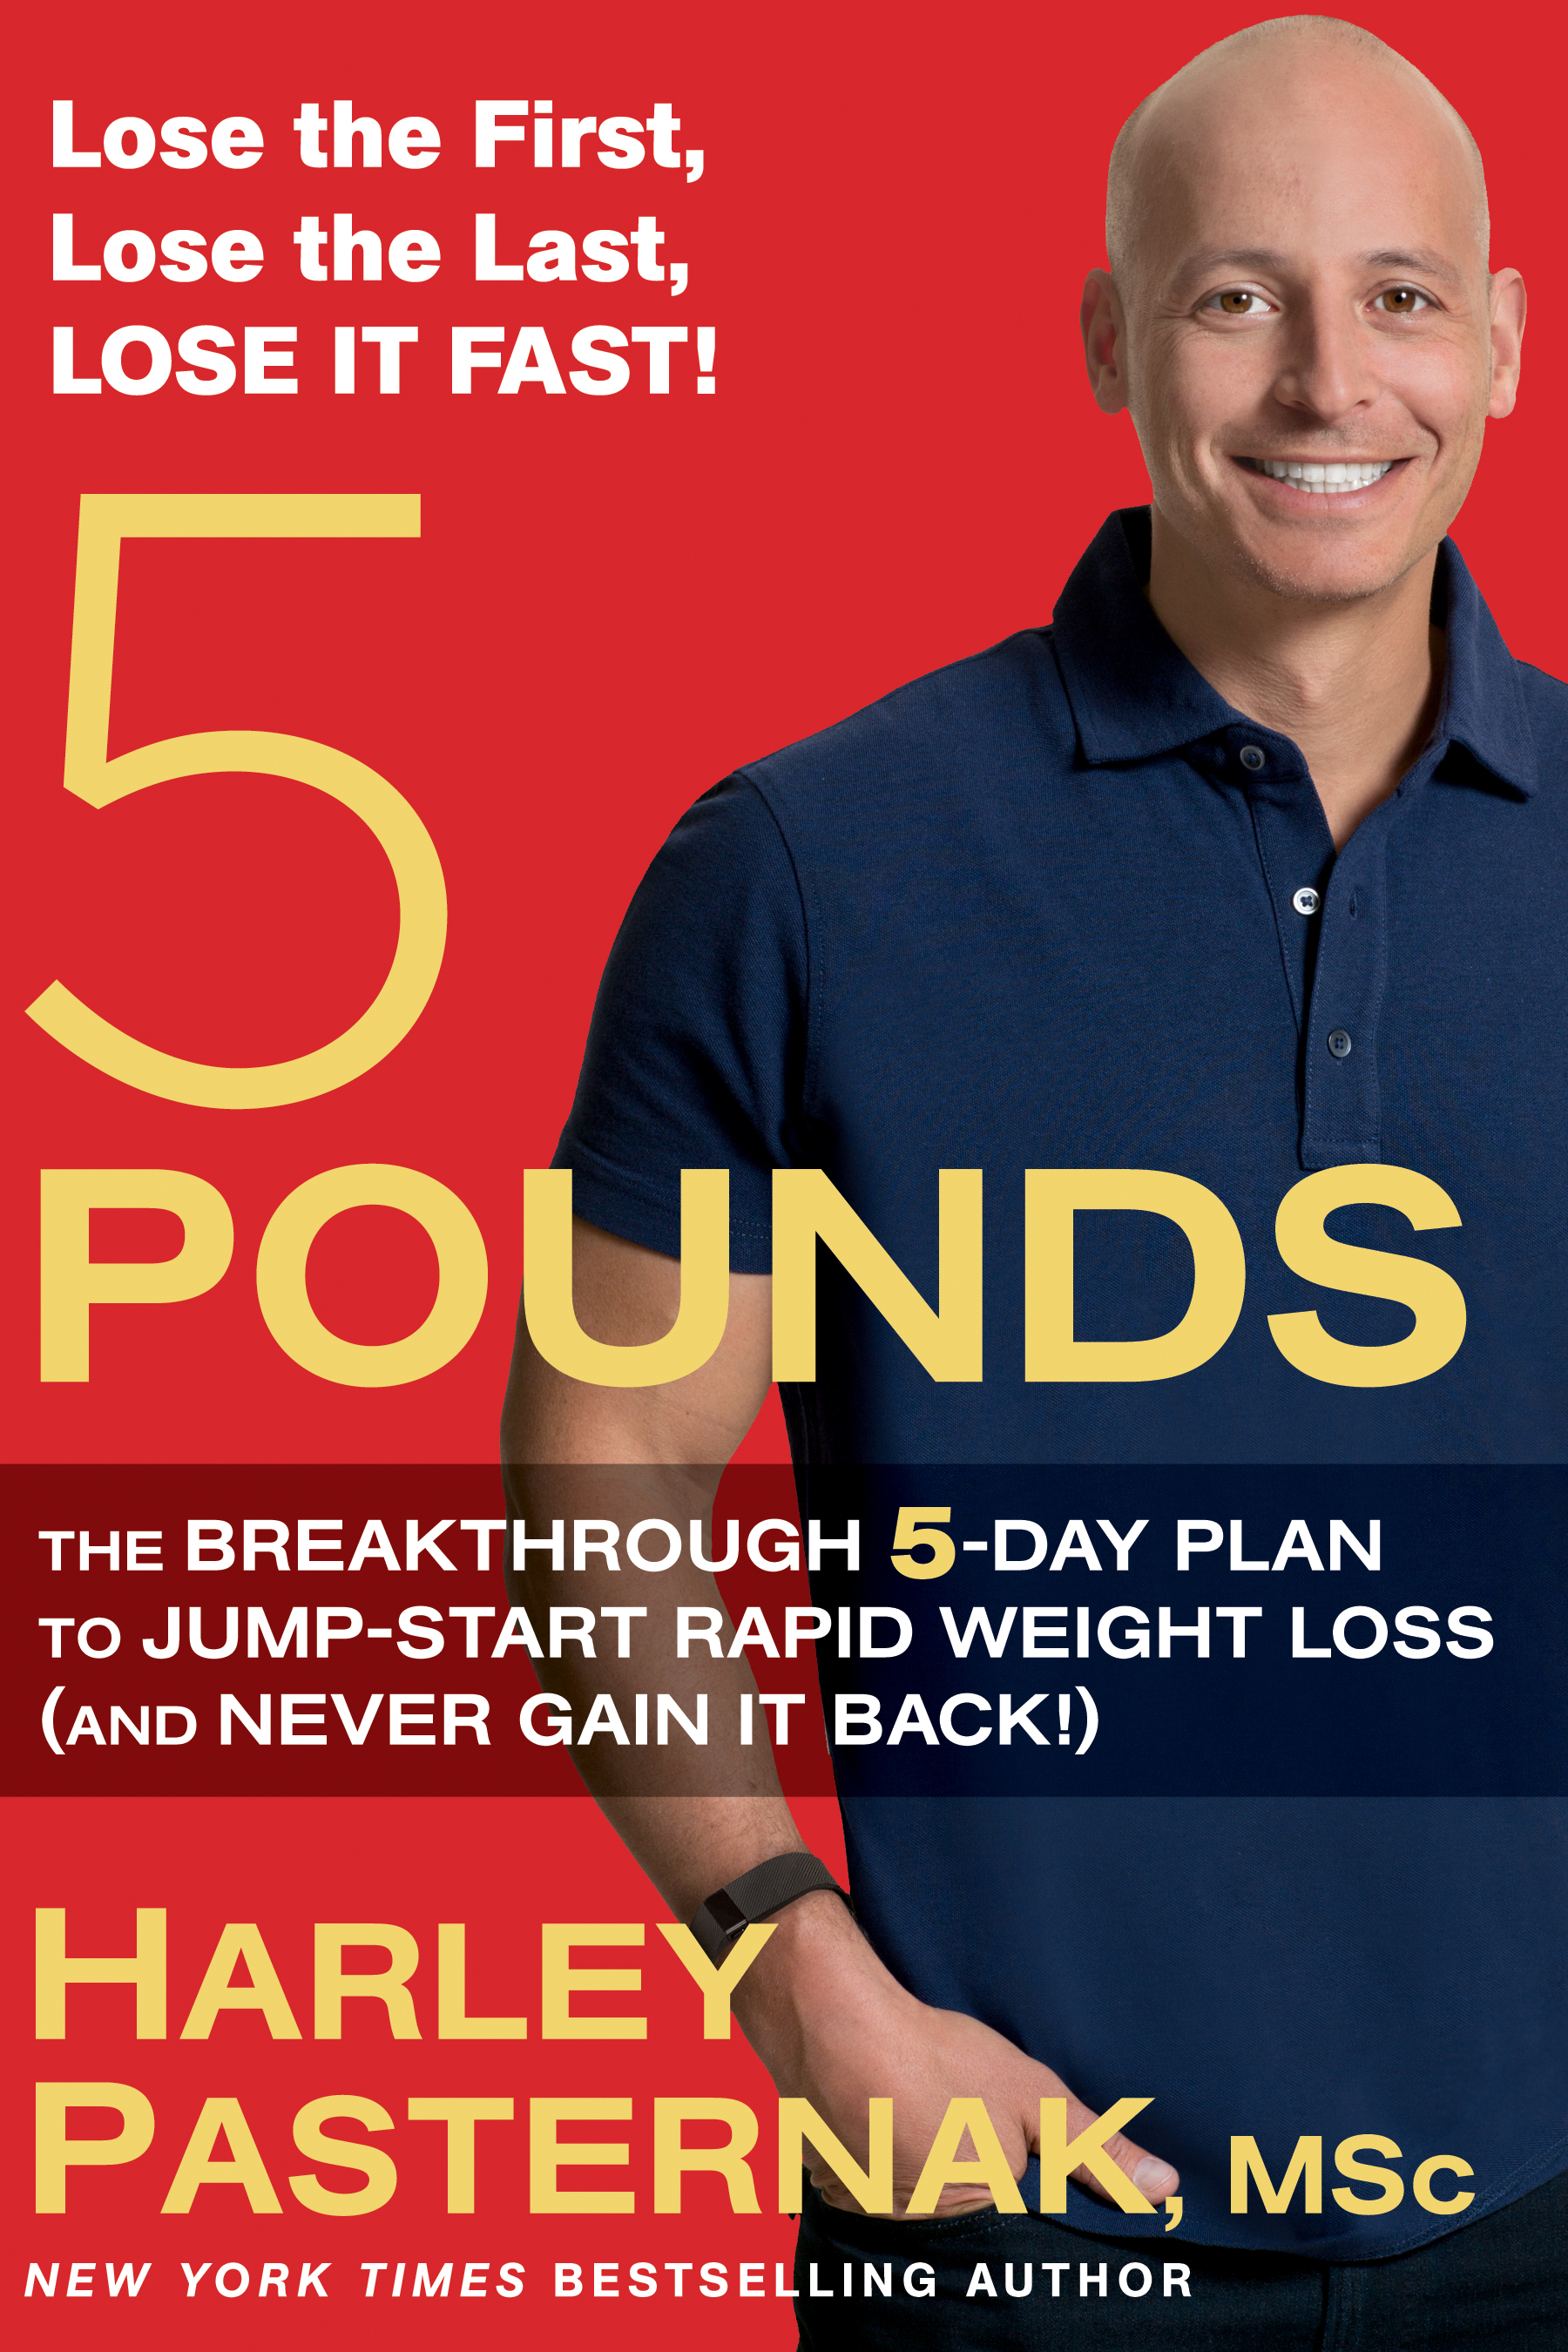 Harley Pasternak offers his tips on losing weight and staying fit